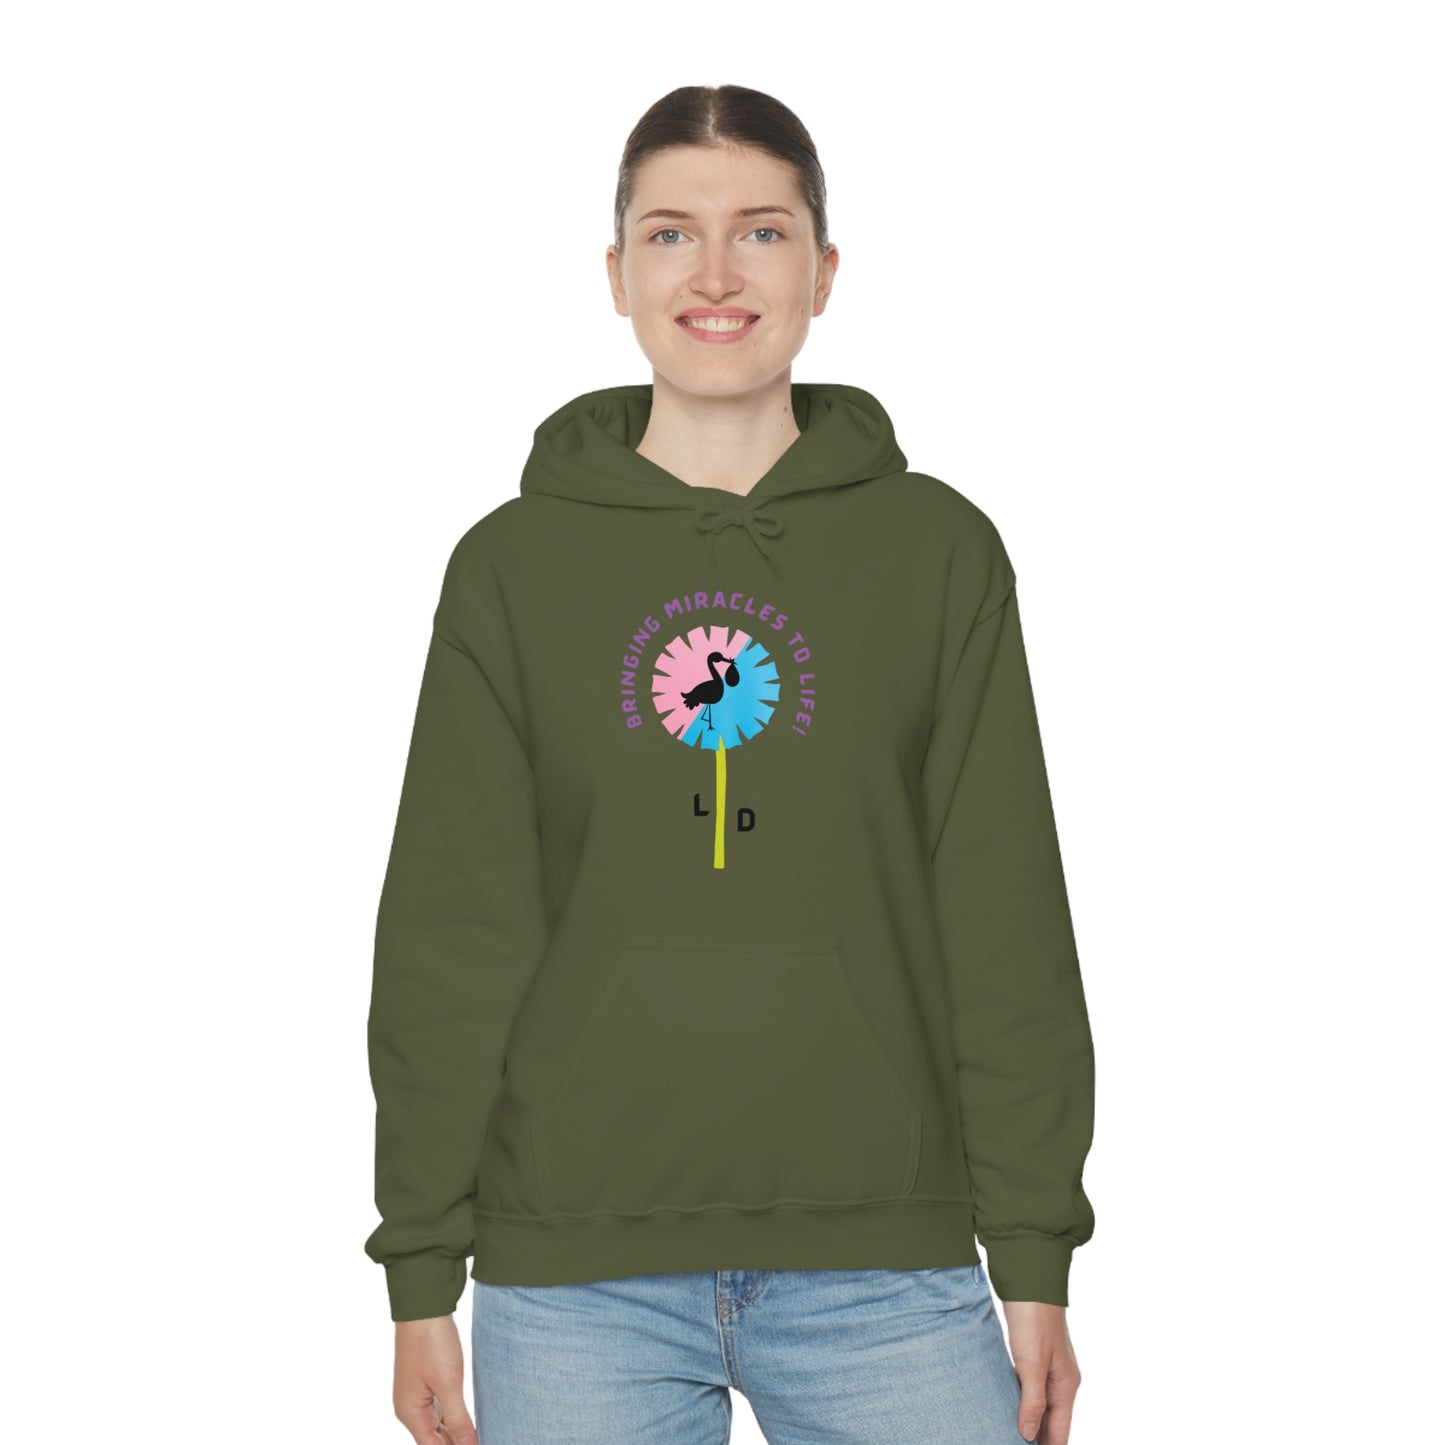 LABOR AND DELIVERY NURSE MIRACLES HOODED SWEATSHIRT GIFT